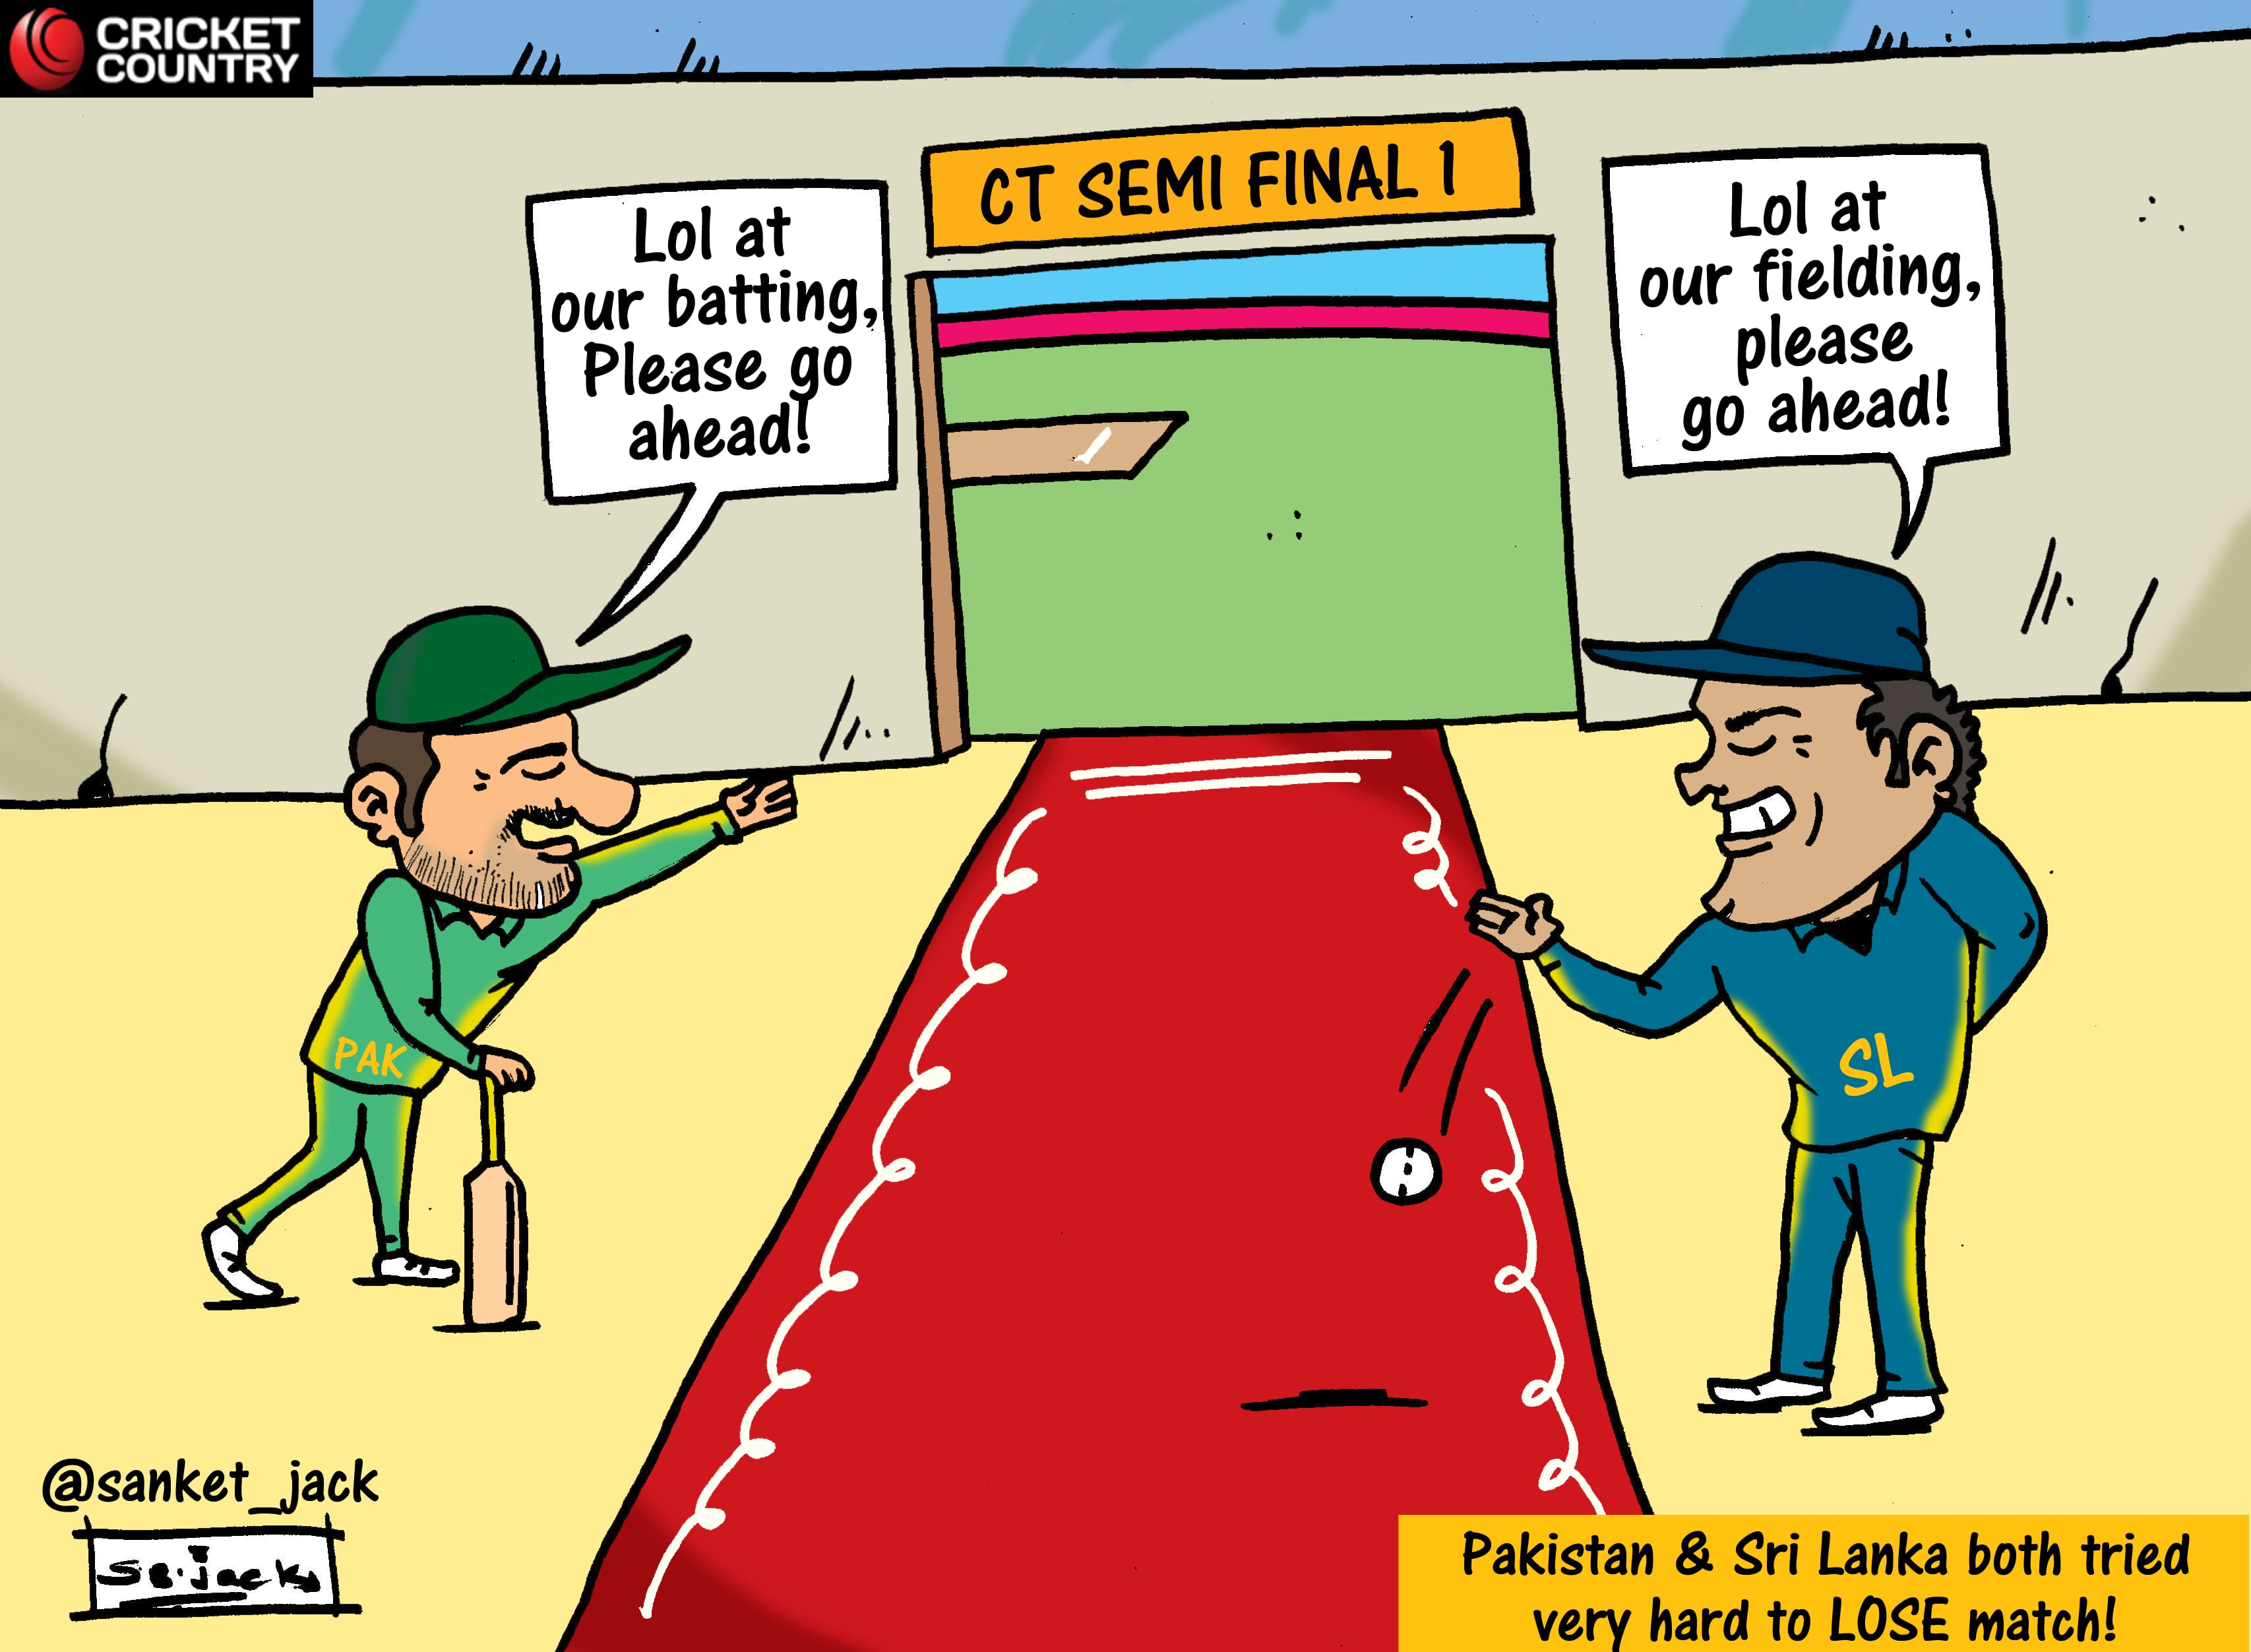 Cartoon: Pak vs SL – both teams tried very hard to lose the game - Cricket Country3413 x 2505